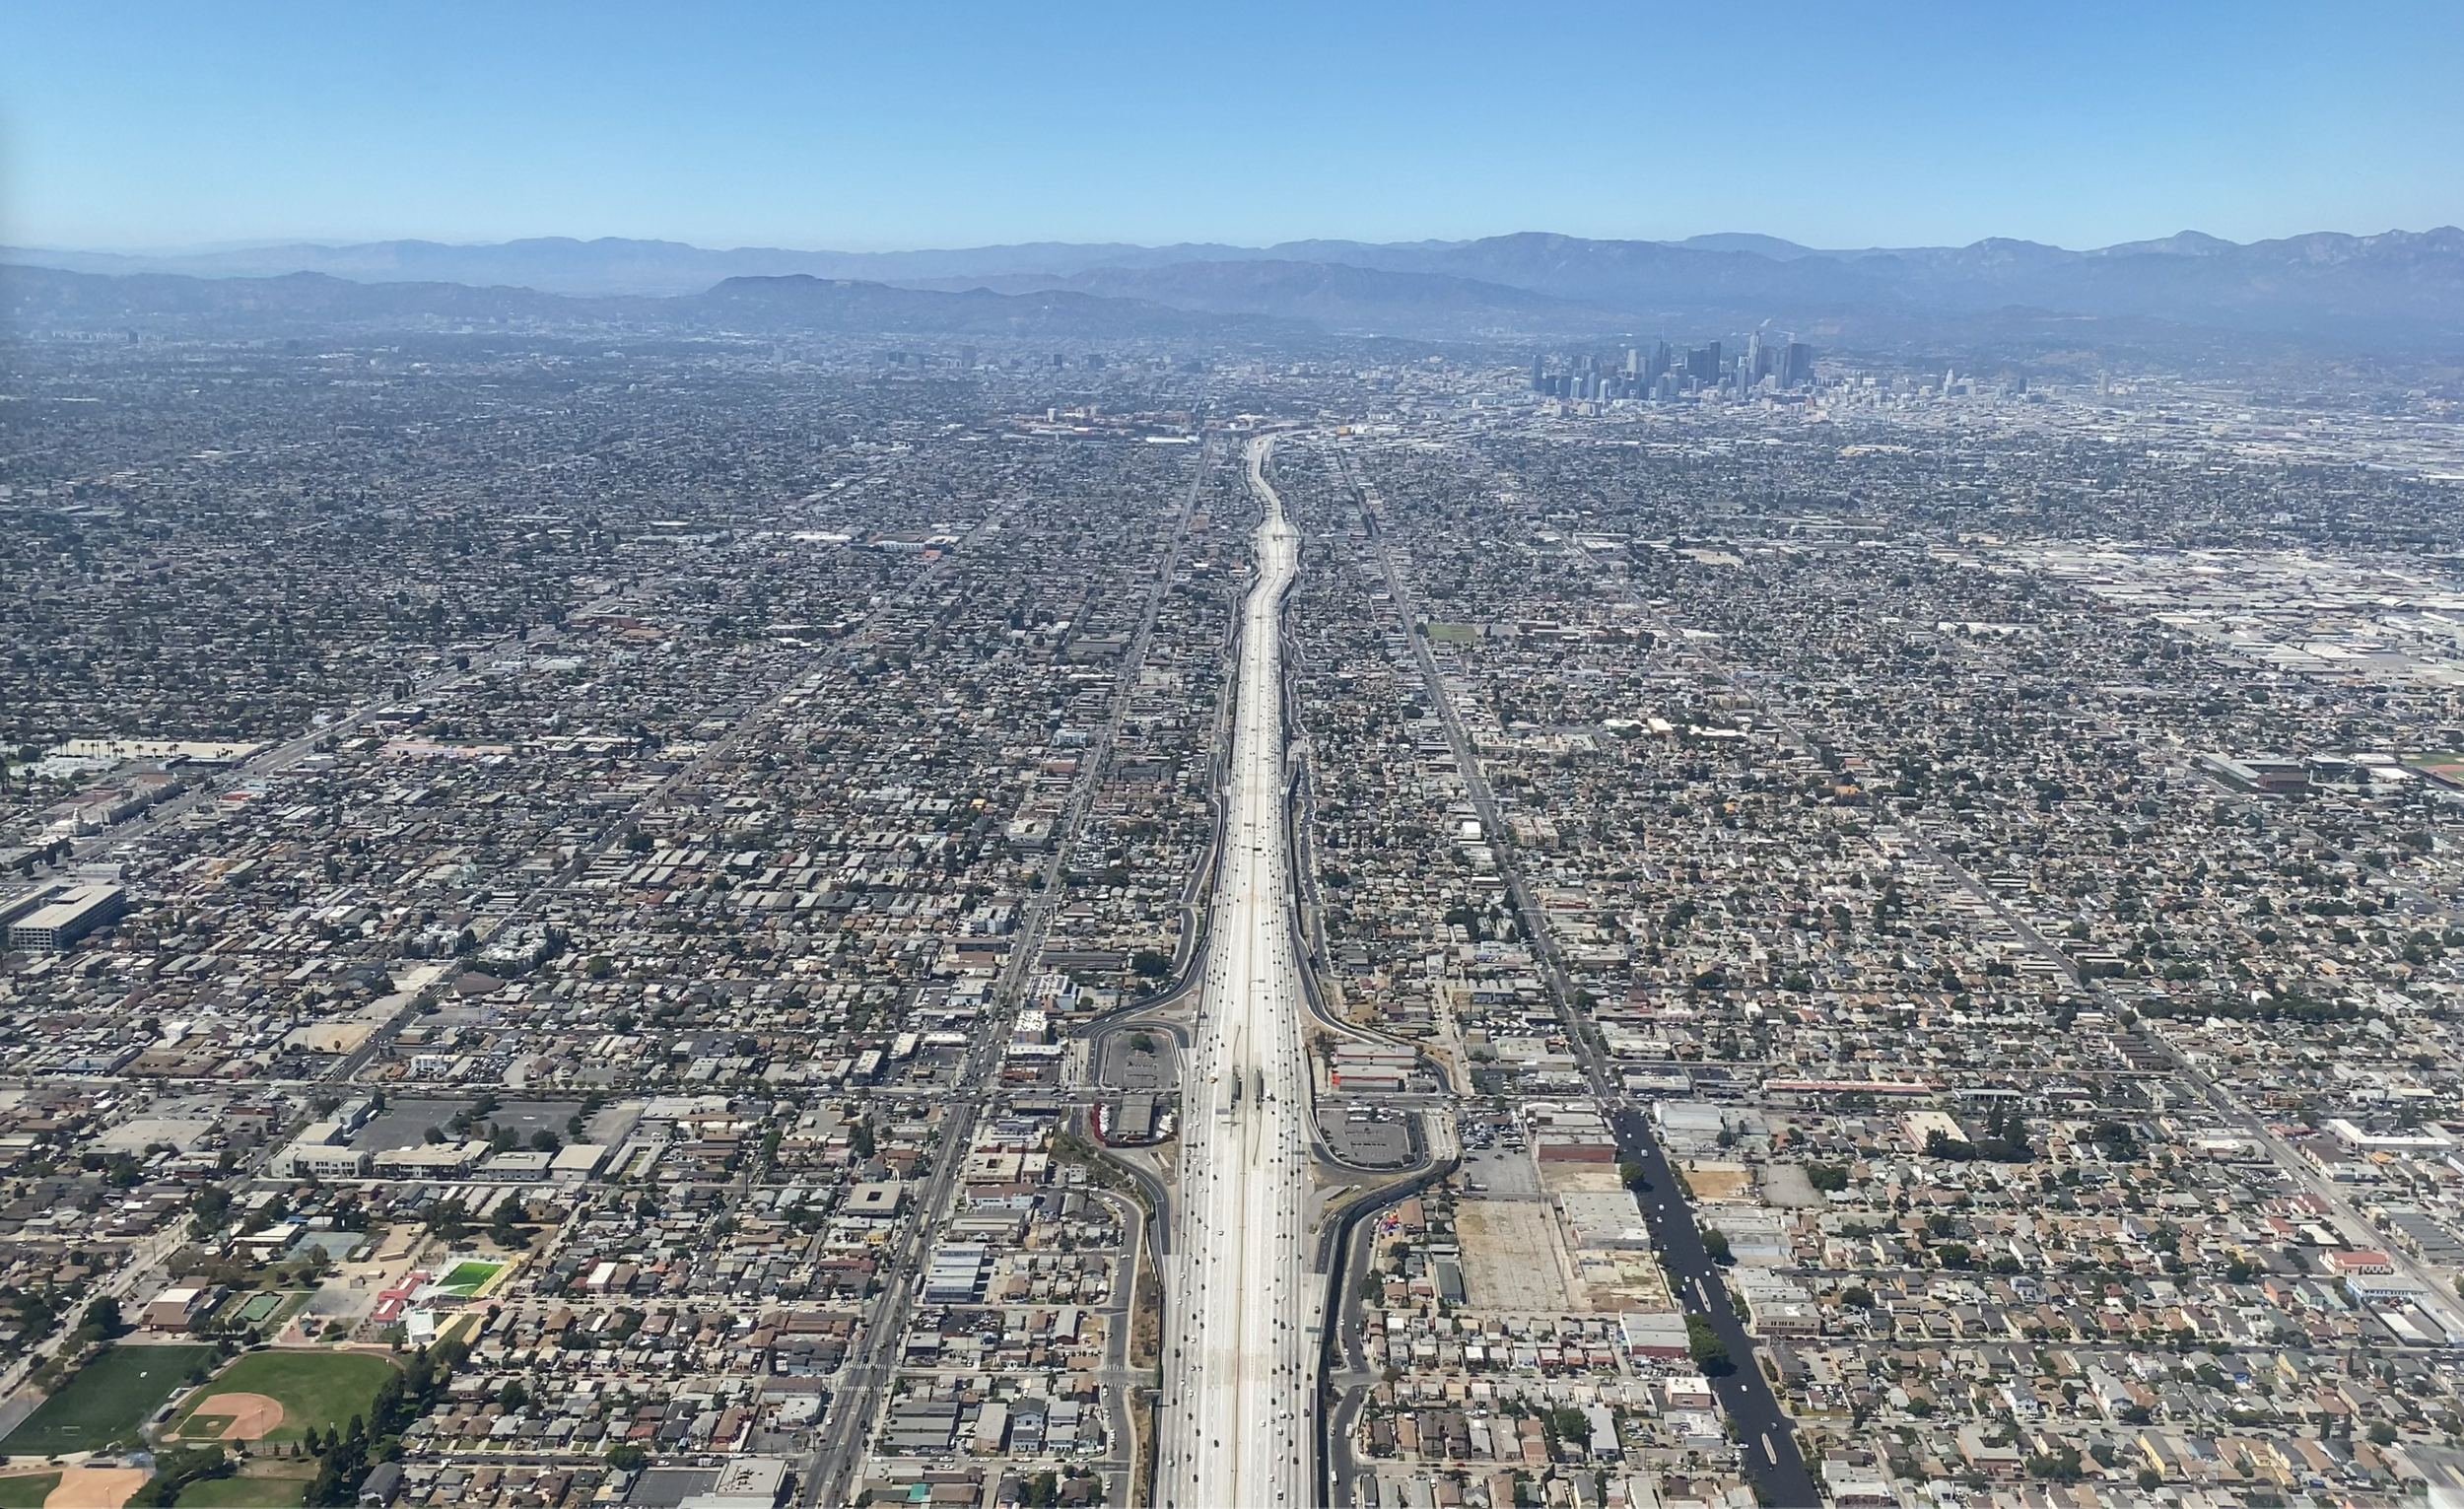 5. Off-ramp: Northbound view of The 110 Freeway, photographed on a startlingly clear flight back home